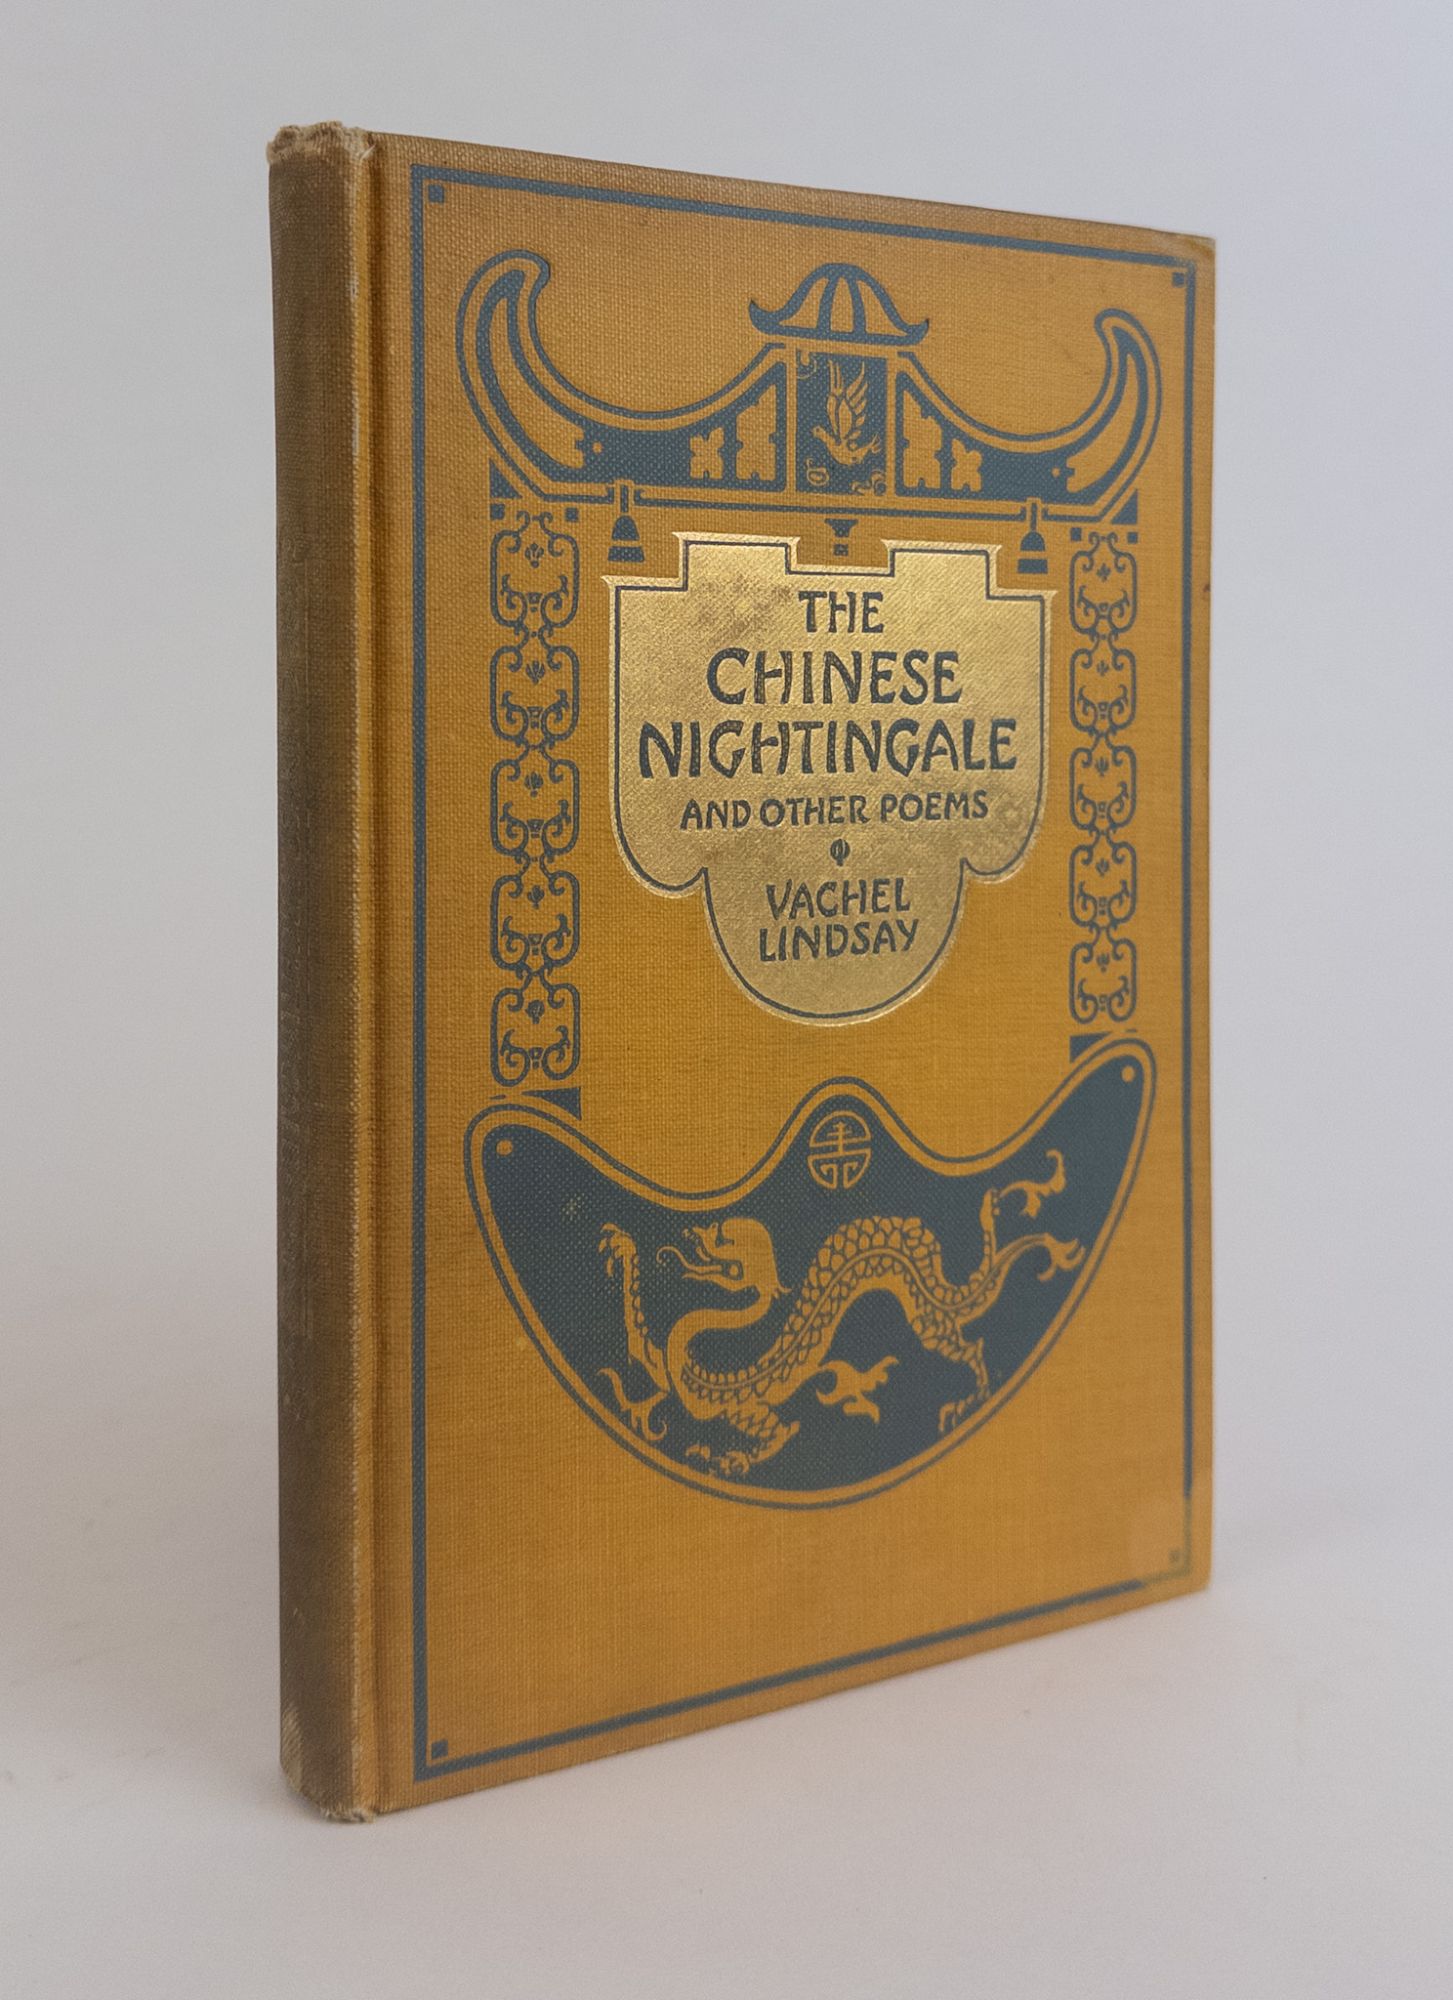 Product Image for THE CHINESE NIGHTINGALE